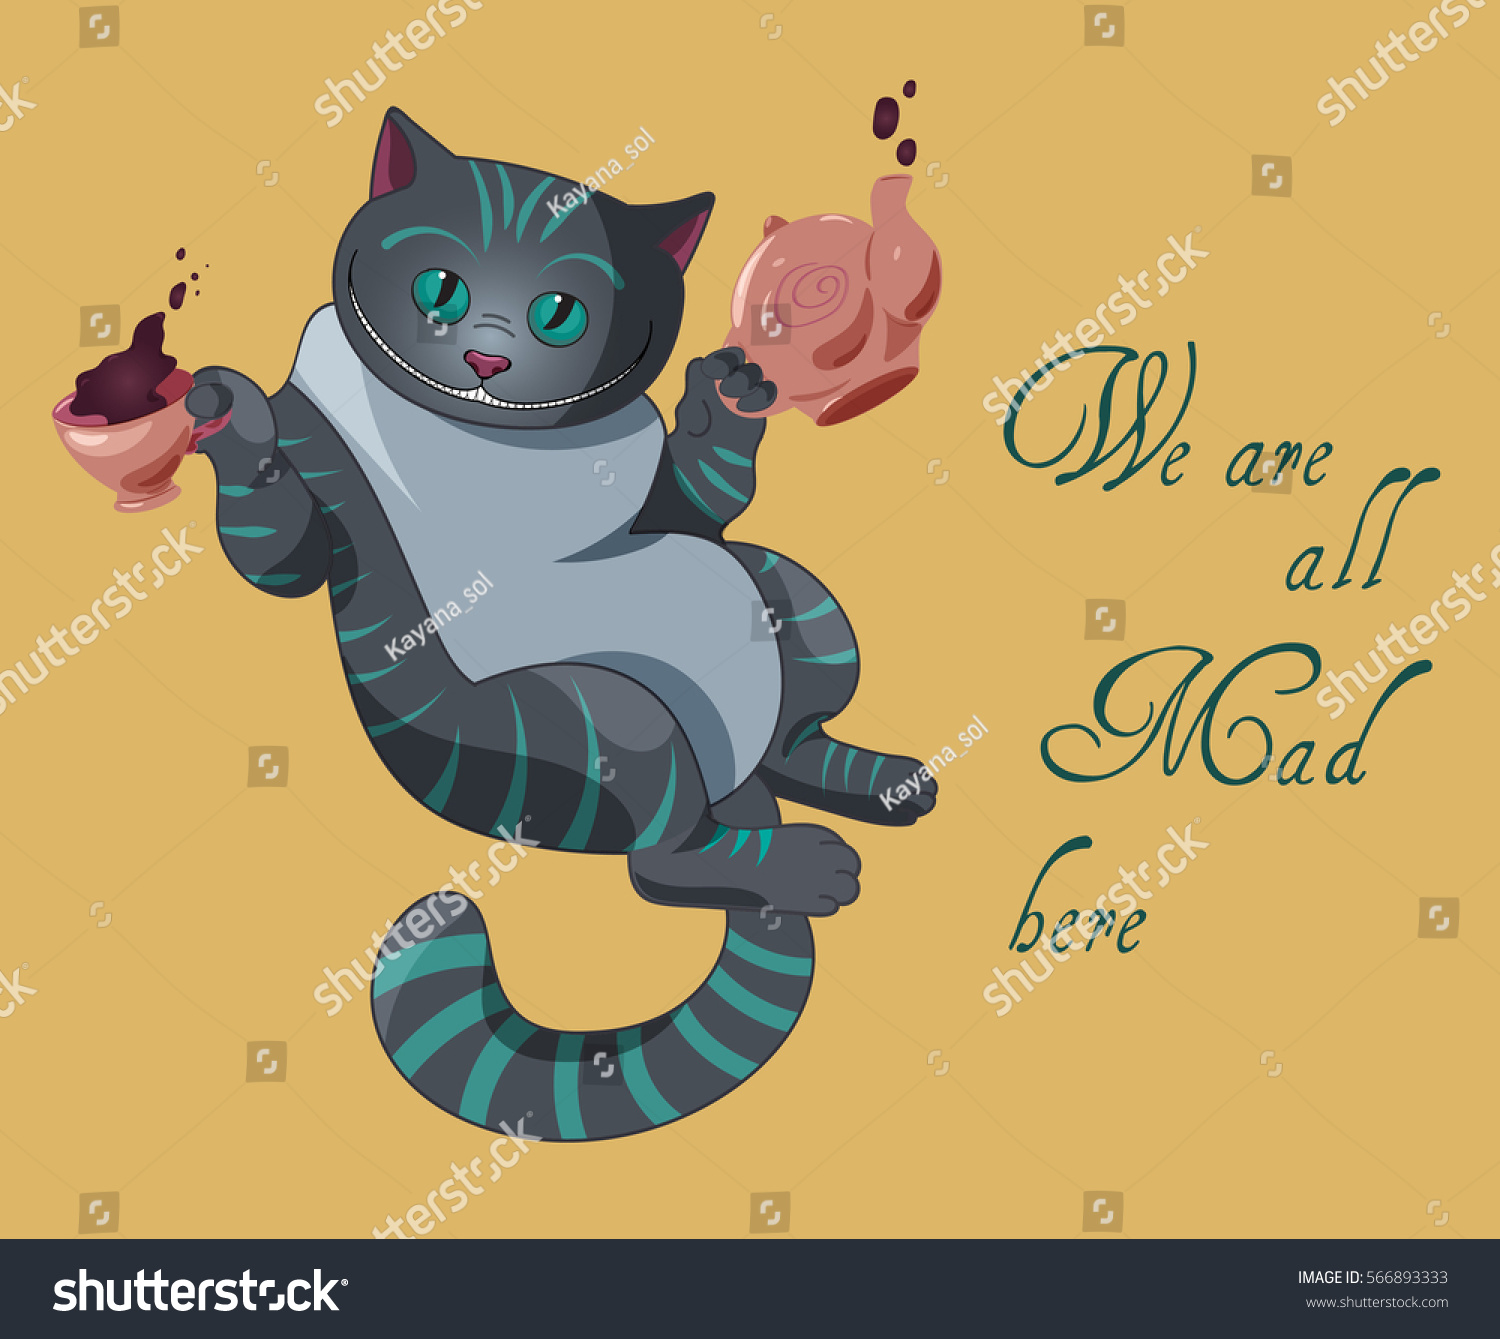 SVG of Alice in Wonderland invitation card - We are all mad here - with cheshire cat, cap of tea and teapot svg